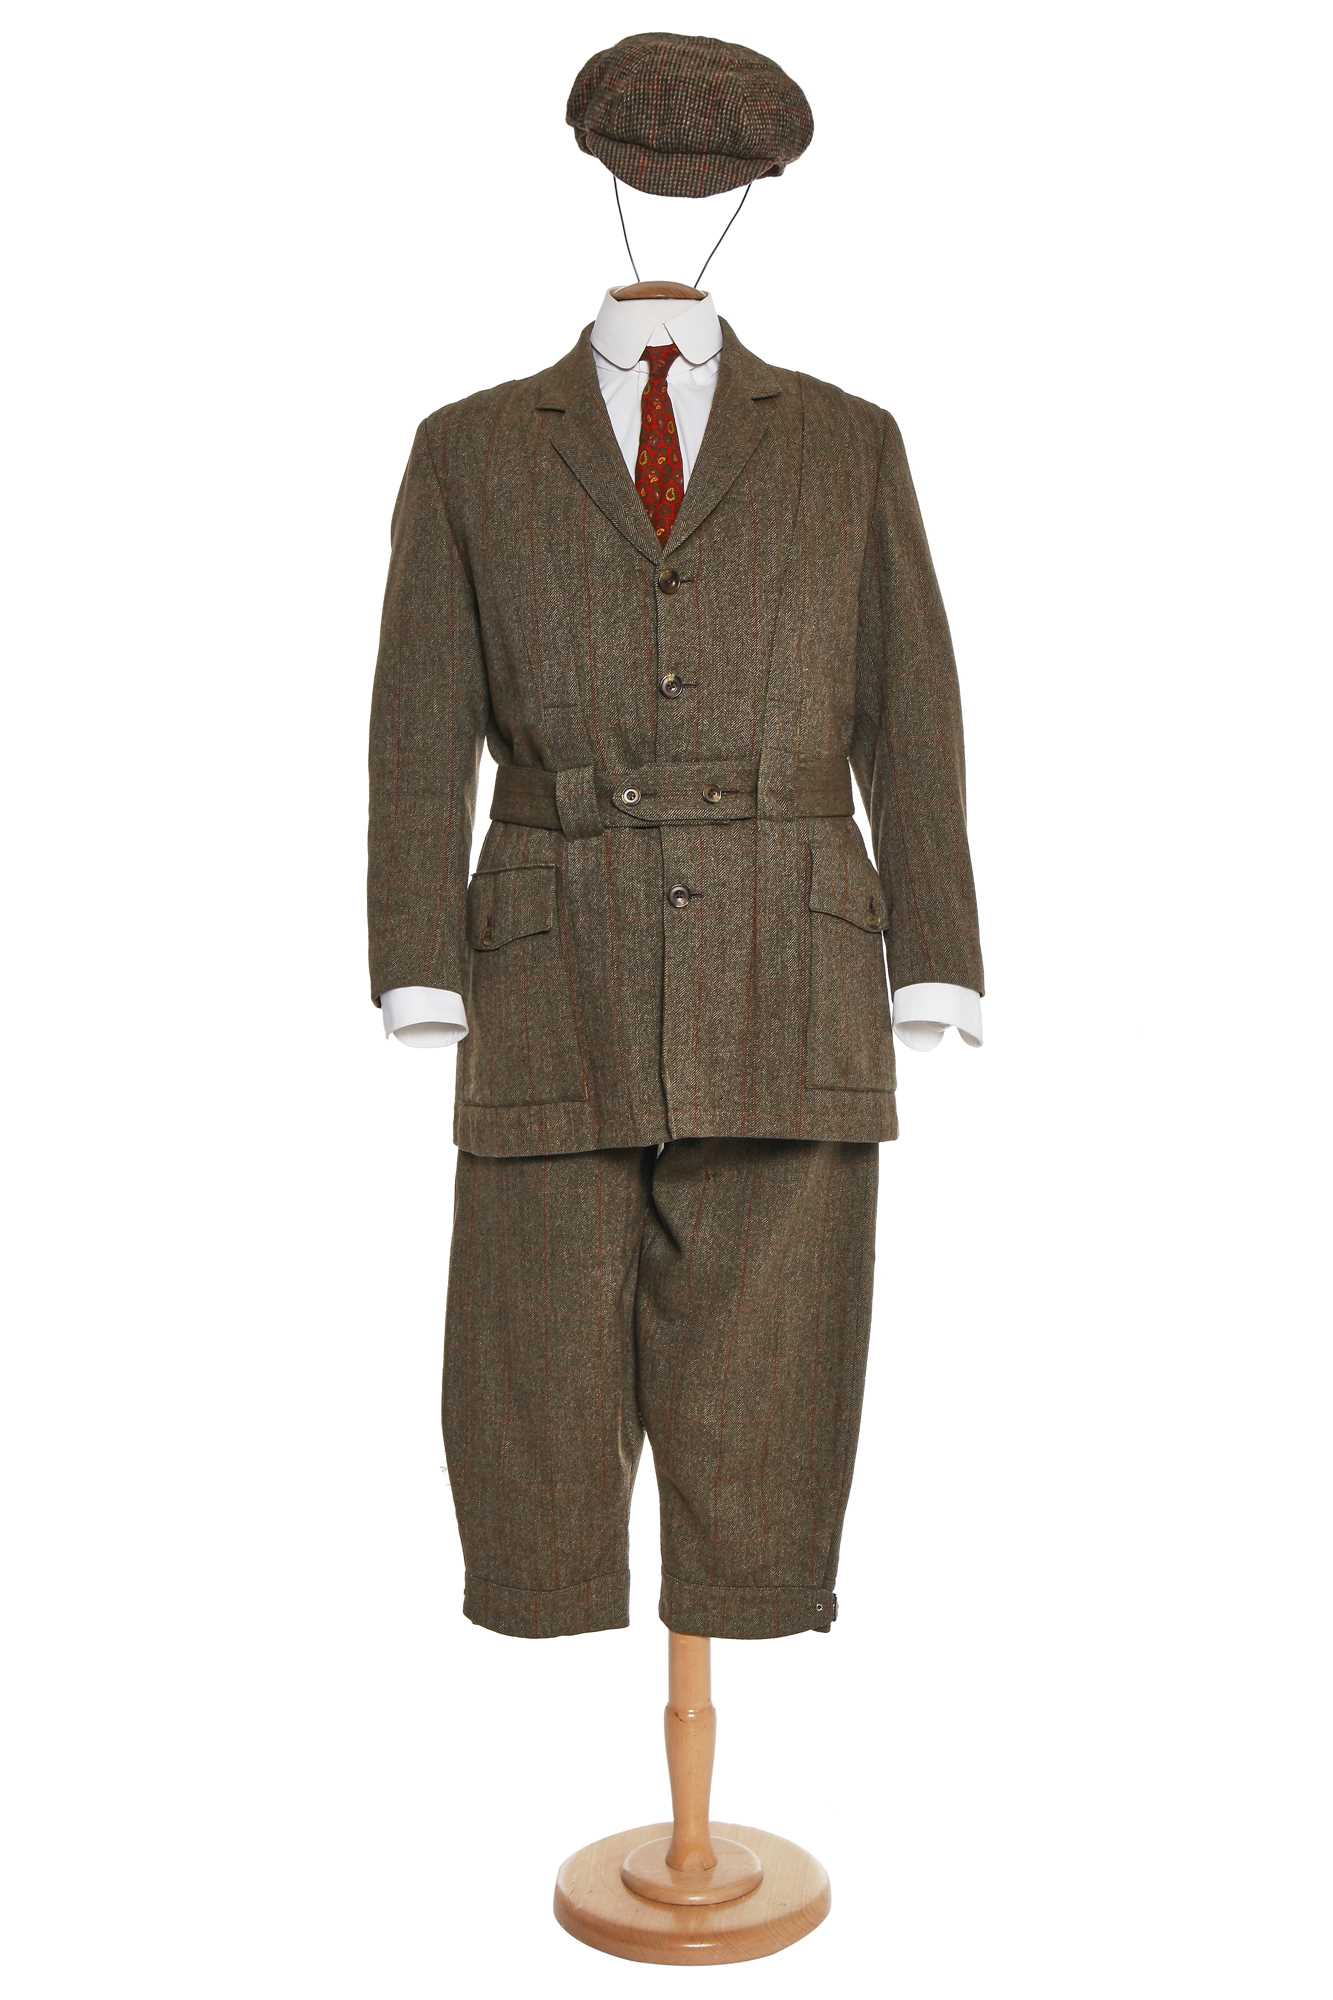 Lot 38 - Hugh Bonneville's costume as Lord Grantham in the TV series 'Downton Abbey', 2010-2011